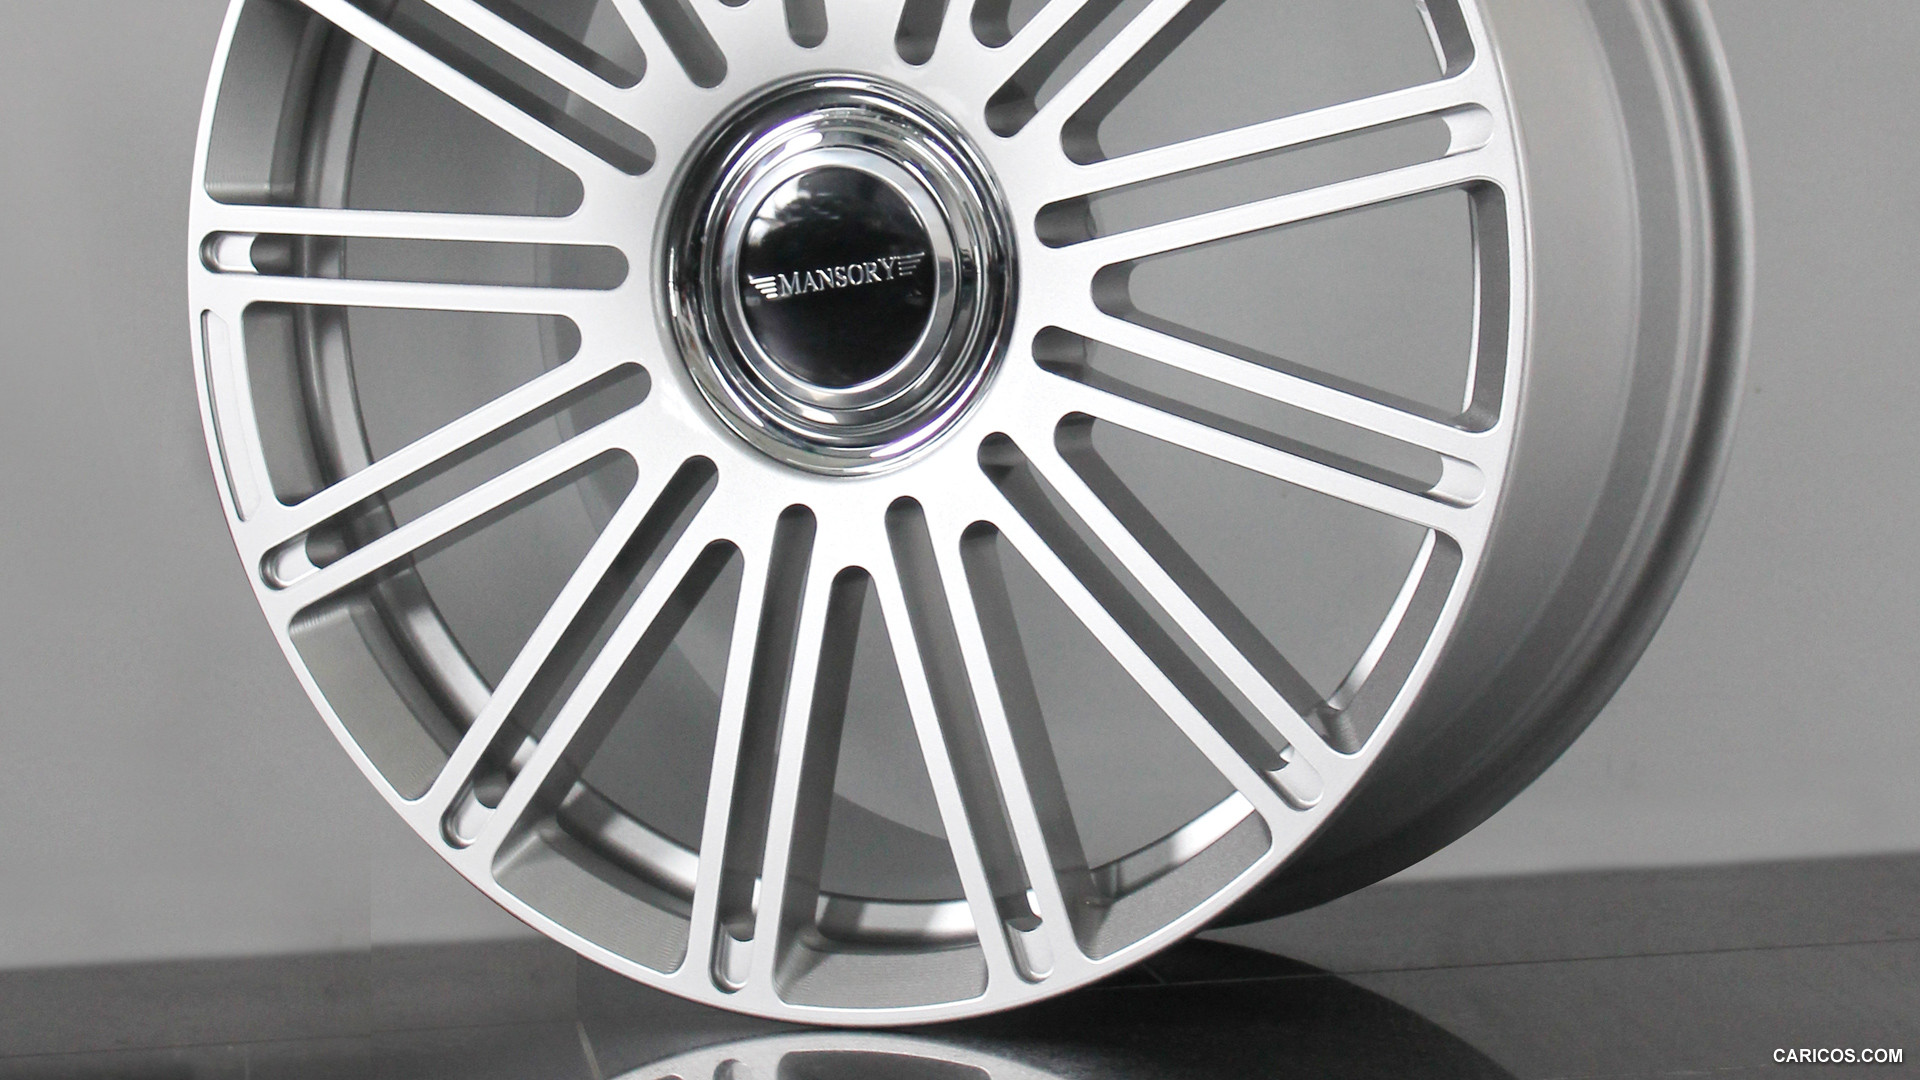 2013 Mansory Sanguis based on Bentley Continental GT  - Wheel, #7 of 7